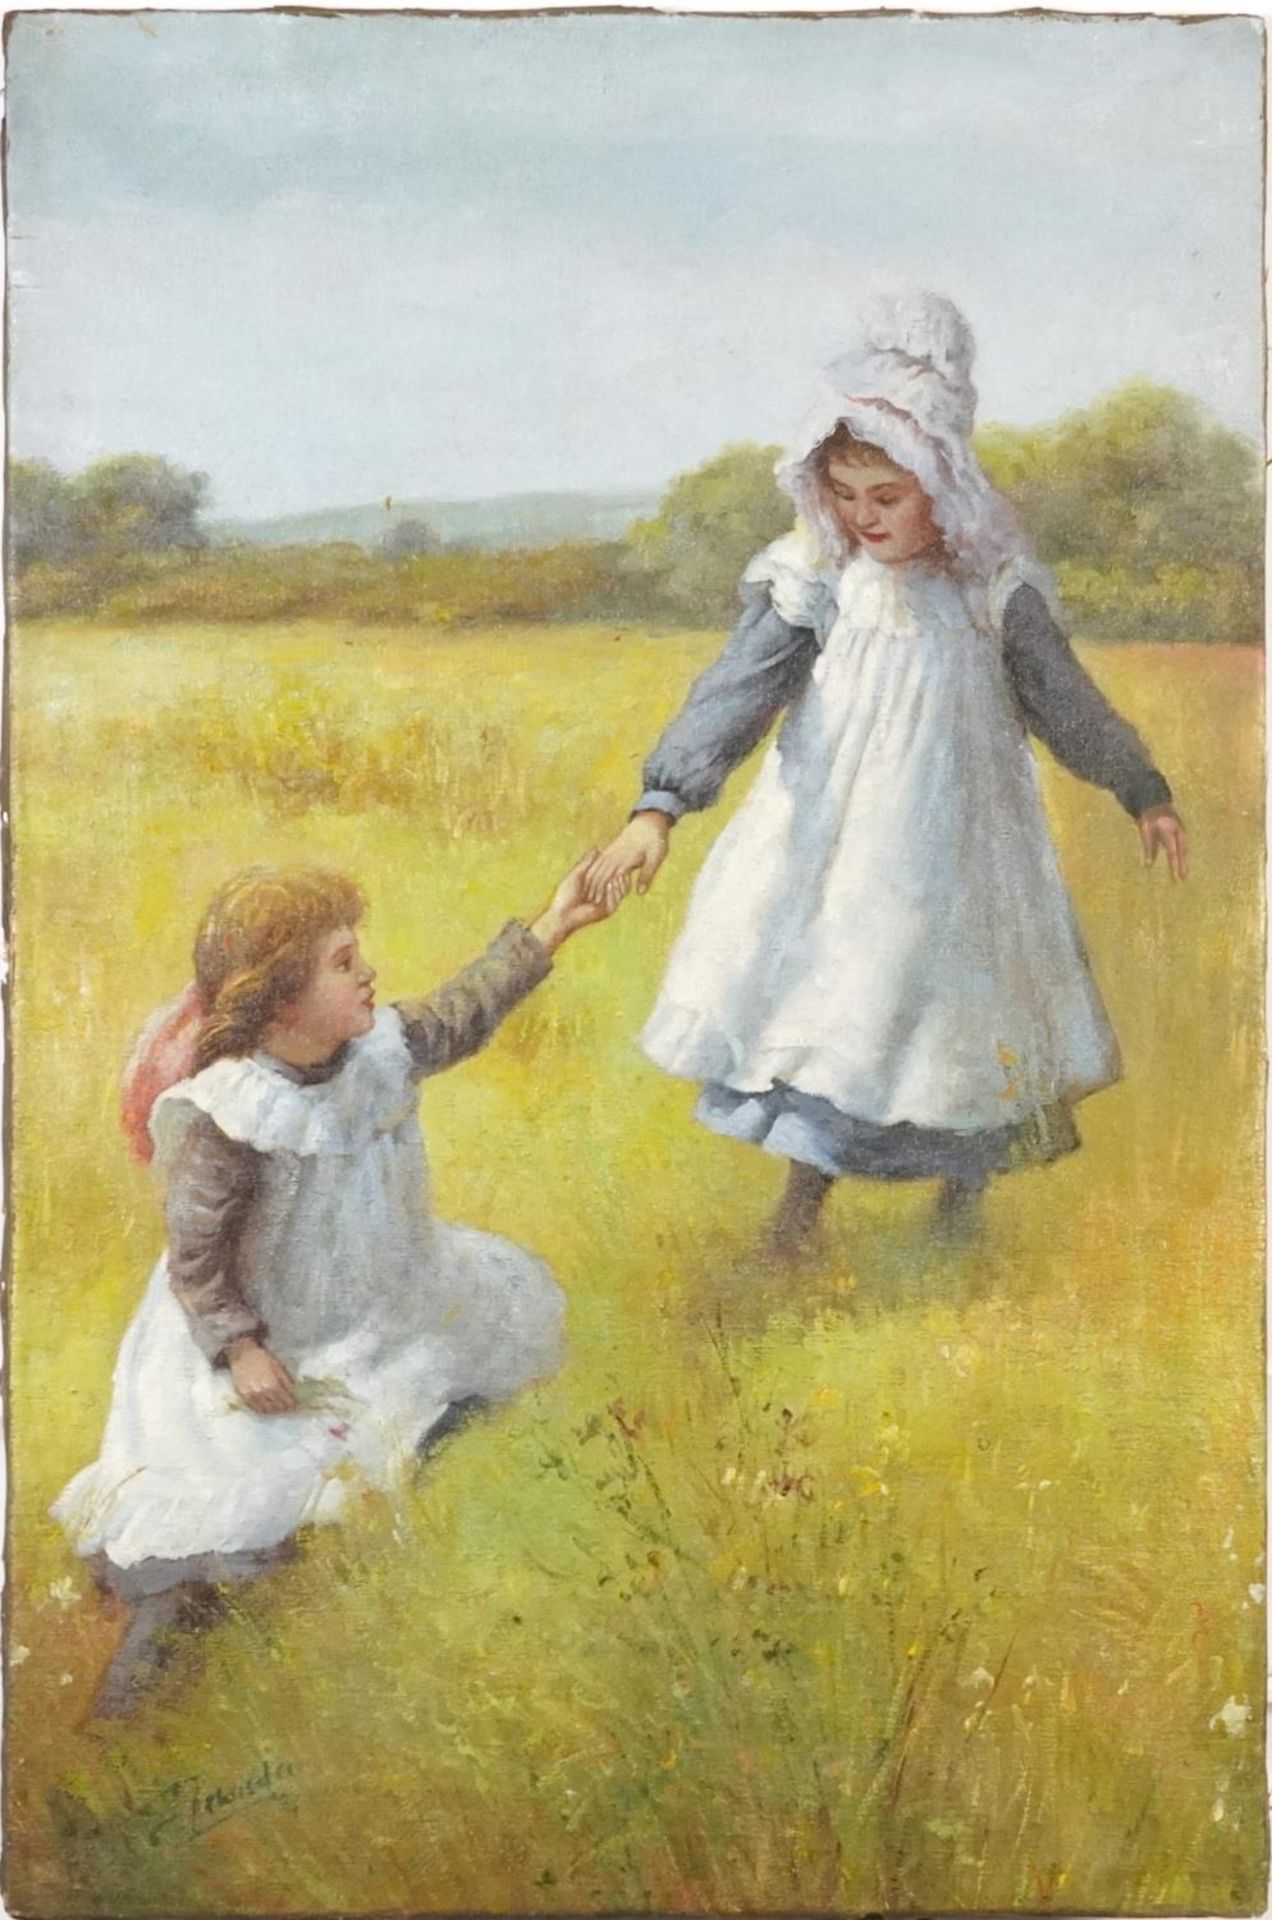 Two young girls playing in a field, Impressionist oil on canvas, unframed, 76cm x 50cm : For further - Image 2 of 4